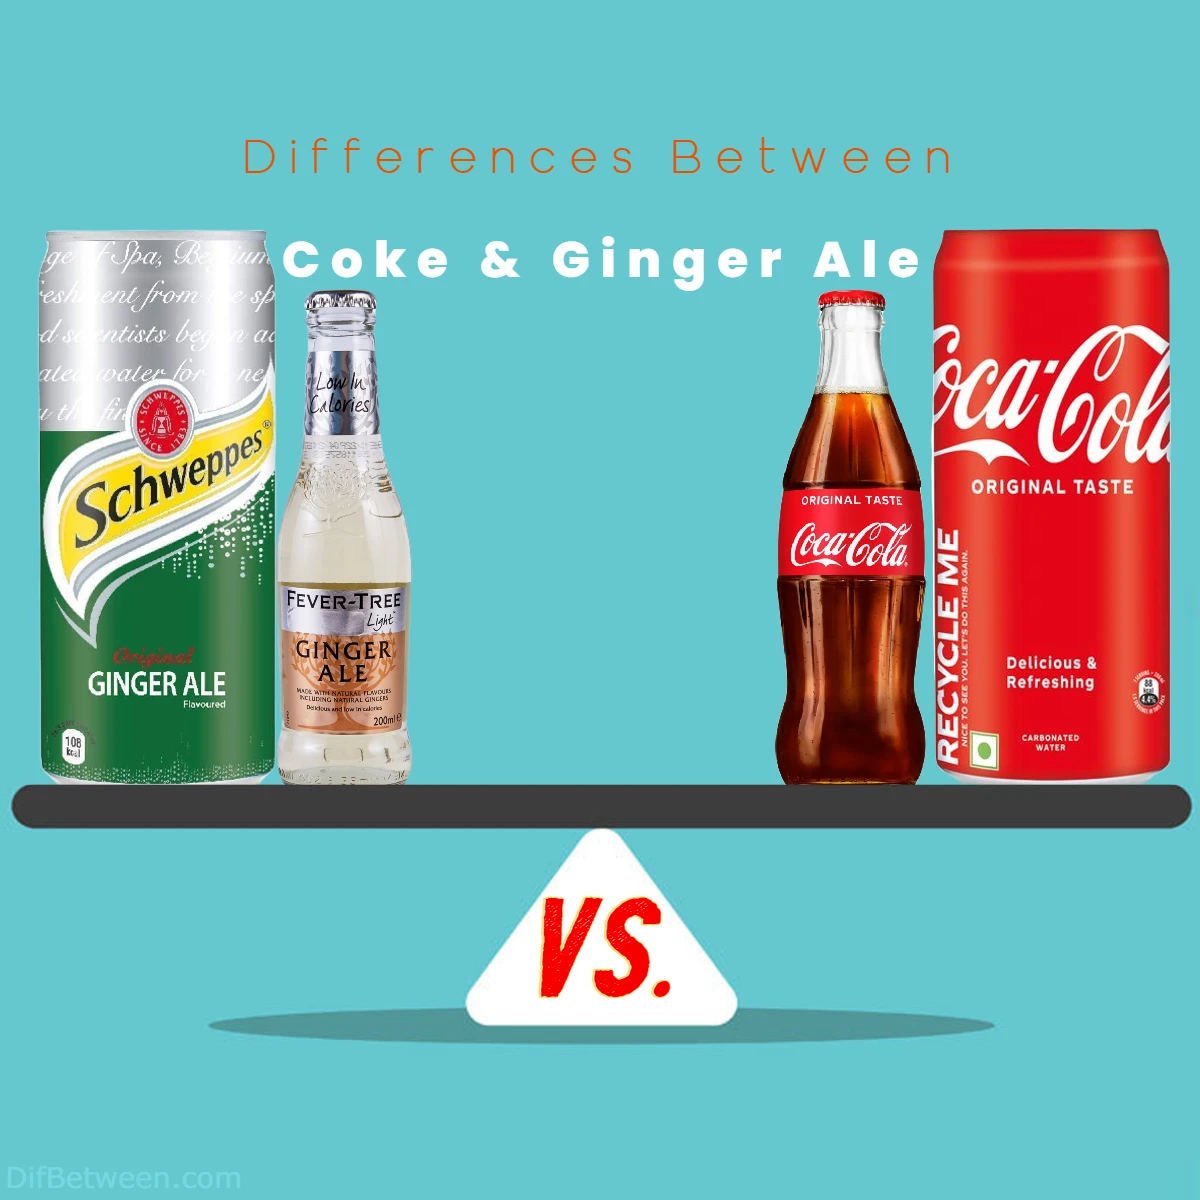 Difference Between Coke and Ginger Ale